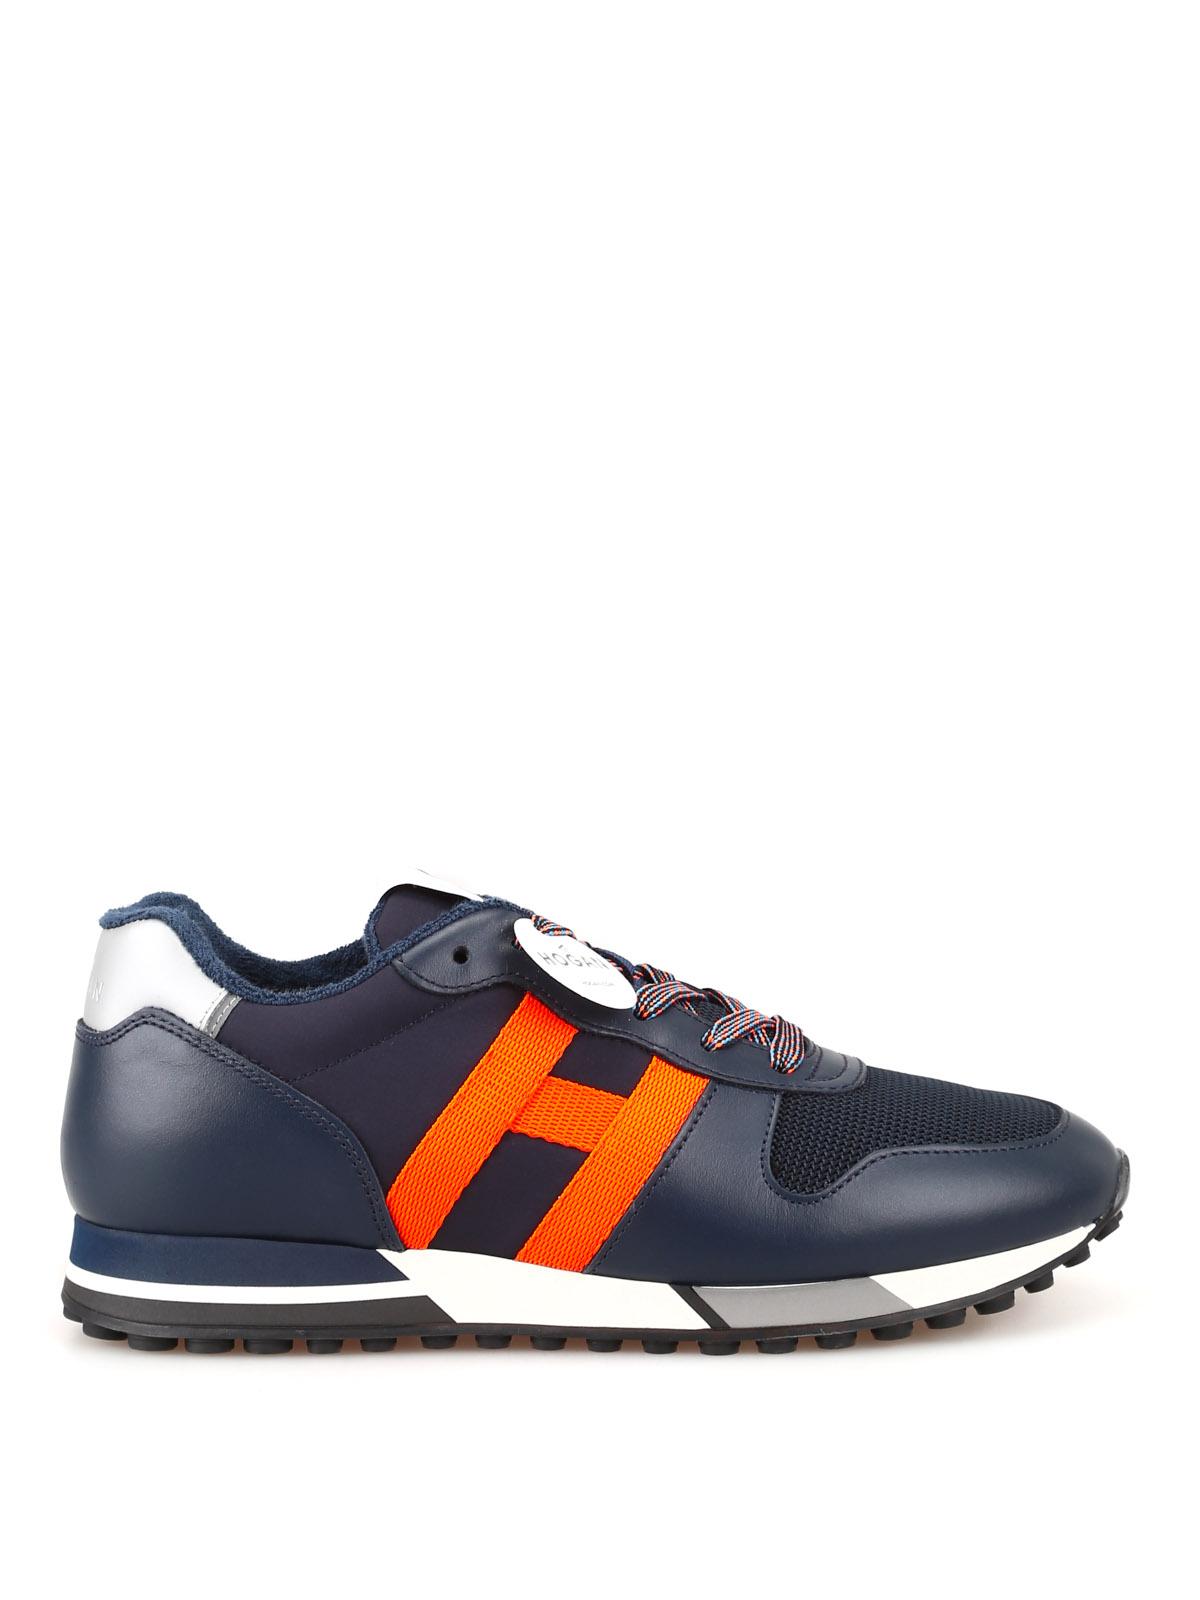 Hogan Leather H383 Retro Running Sneakers in Blue for Men - Lyst